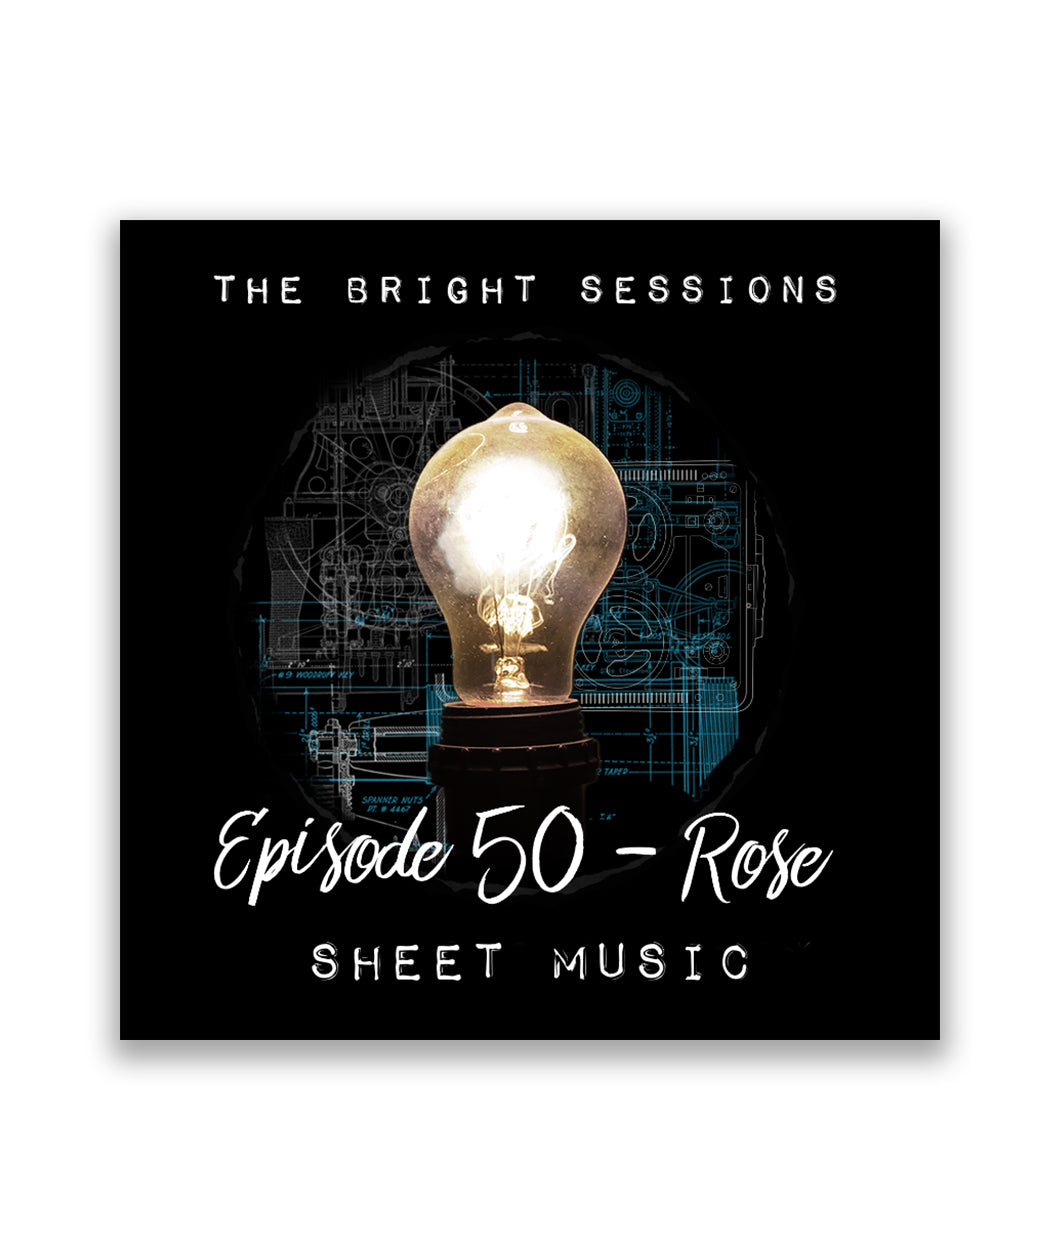 A black square with an illuminated light bulb in the middle. On the top is the text "The Bright Sessions" with "Episode 50 - Rose; Sheet Music".